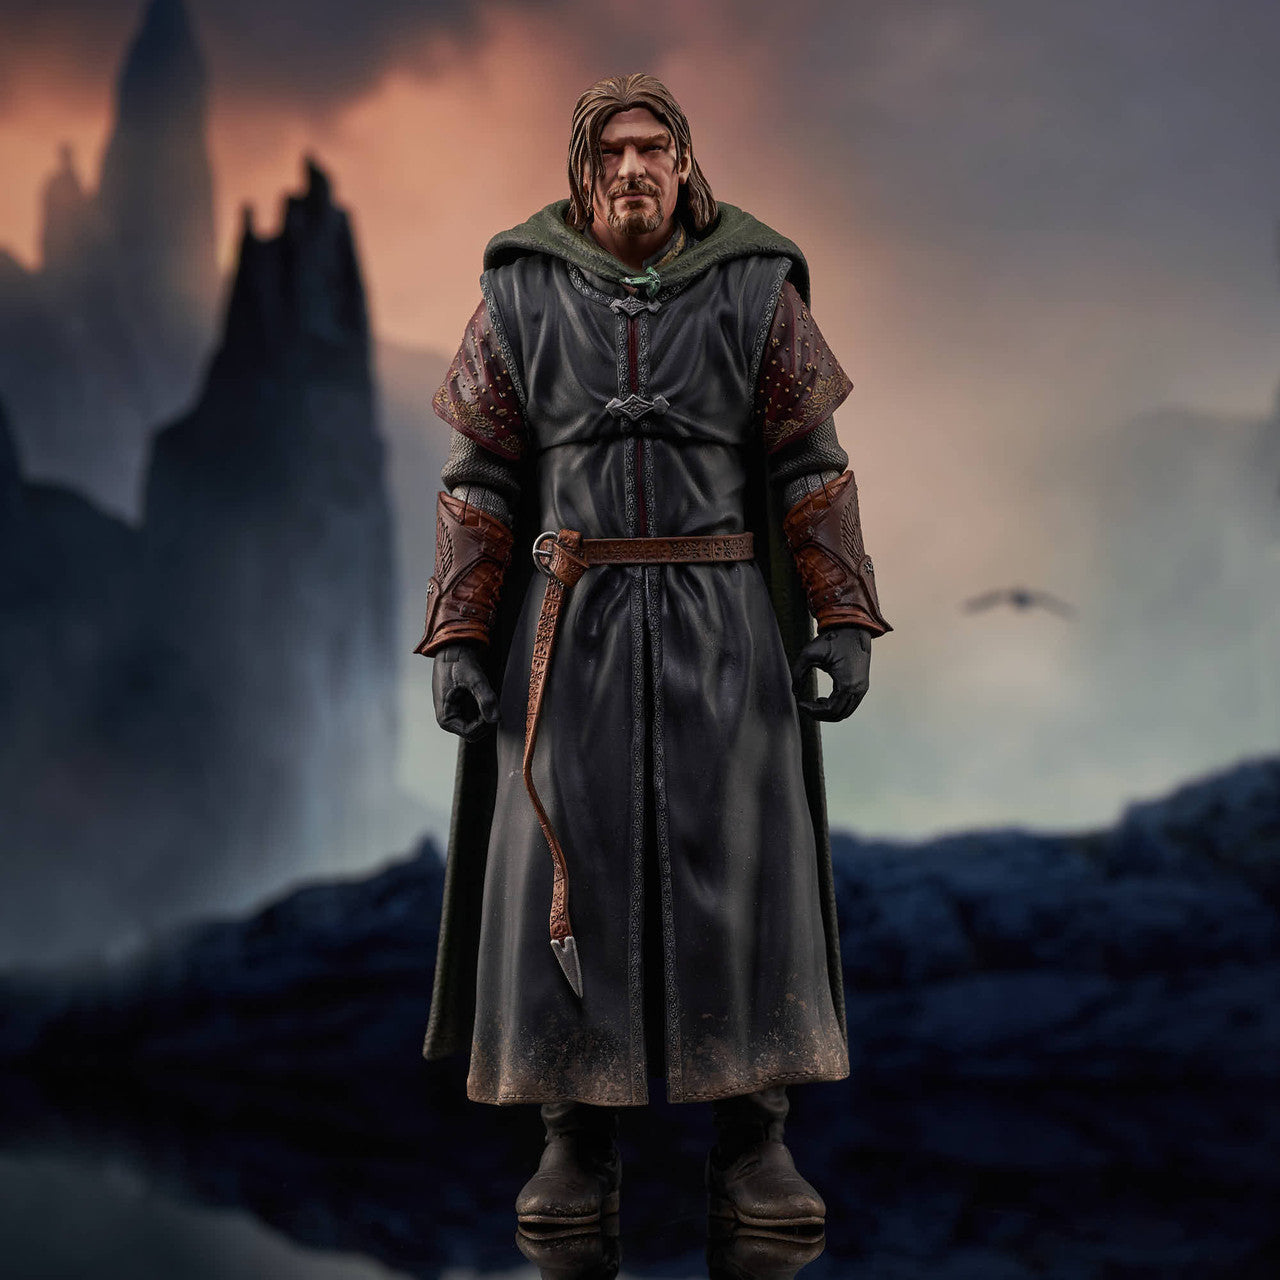 Boromir Deluxe Action Figure LOTR Series 5 By Diamond Select